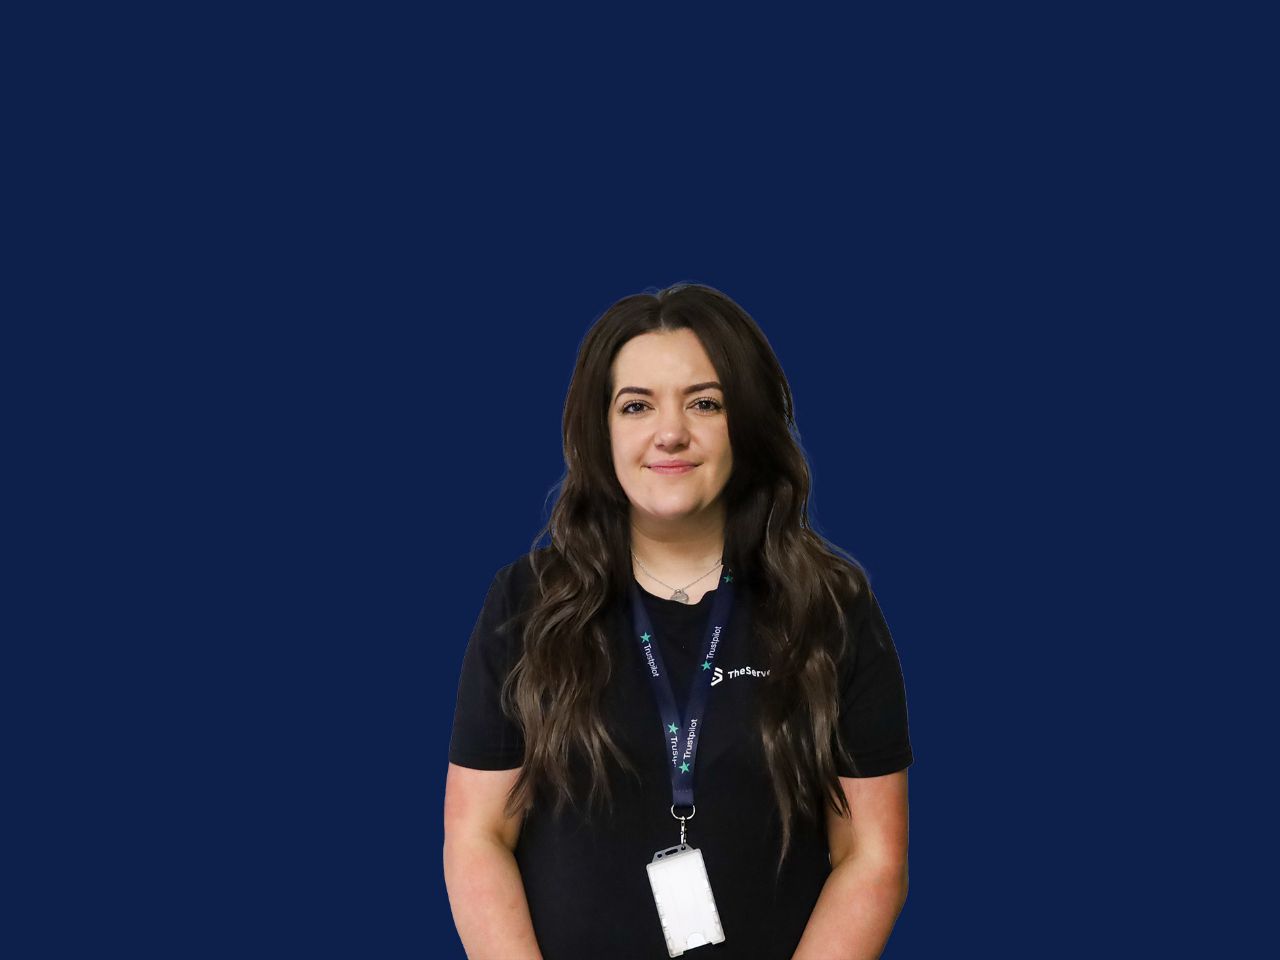 Working at The Server Group - Meet Laura